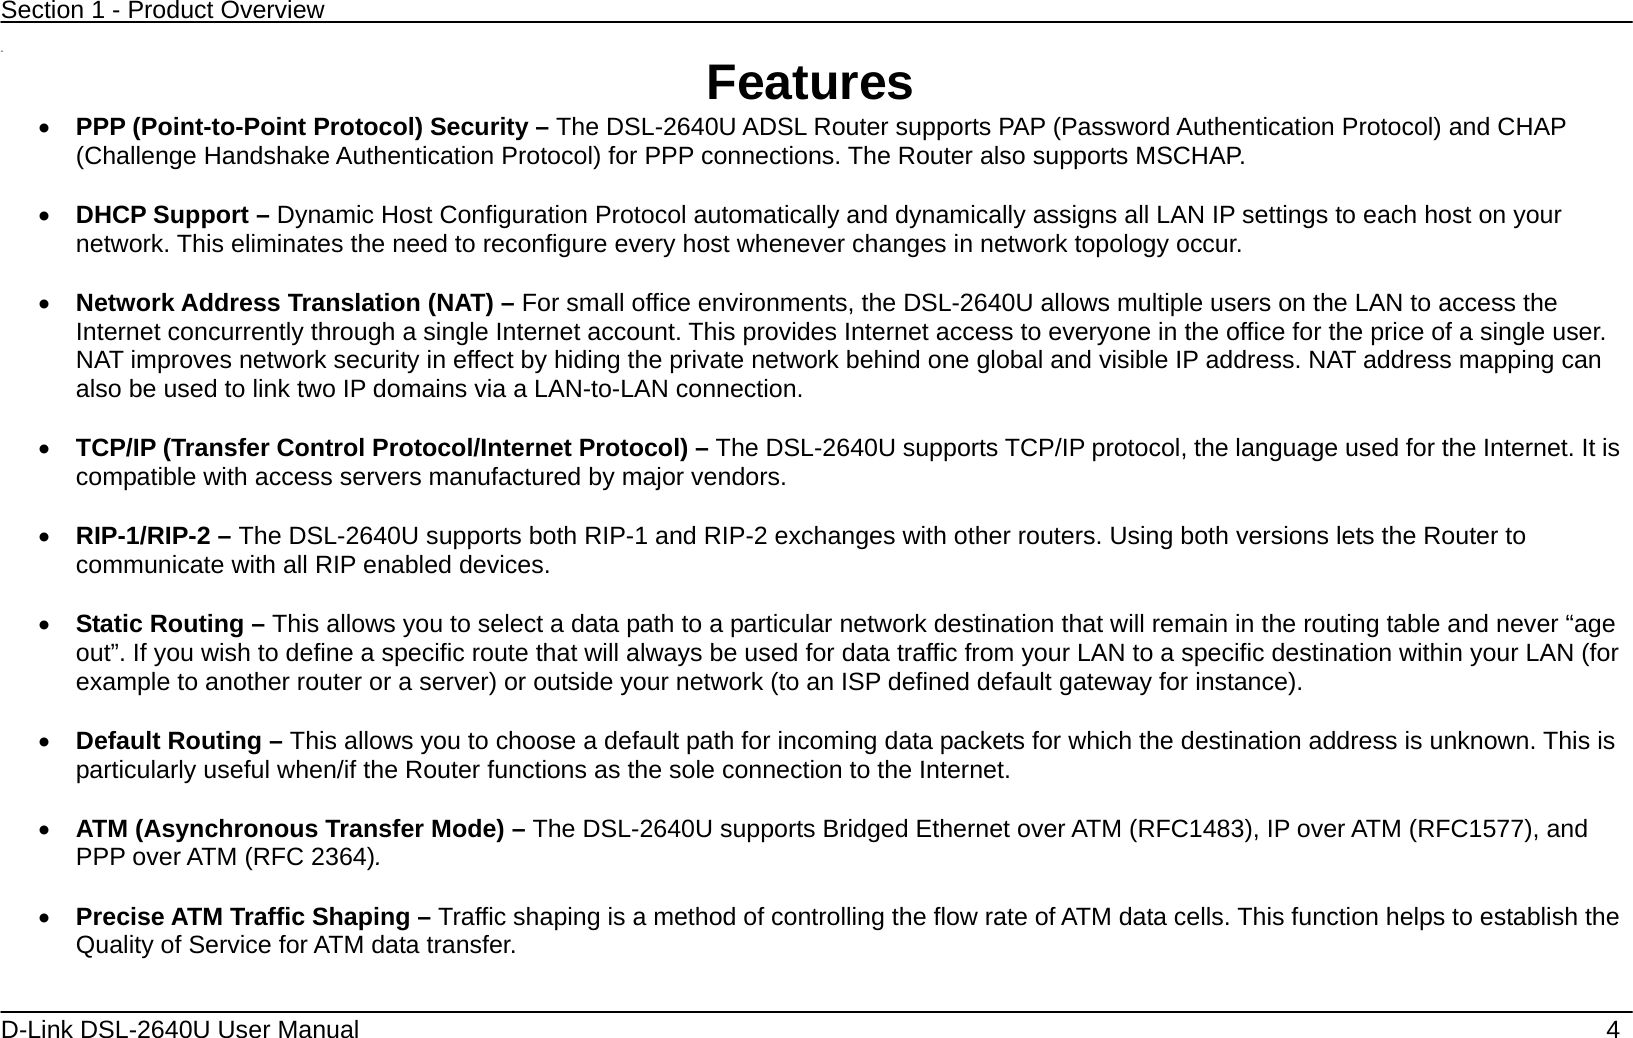 Section 1 - Product Overview  D-Link DSL-2640U User Manual    4  11  Features • PPP (Point-to-Point Protocol) Security – The DSL-2640U ADSL Router supports PAP (Password Authentication Protocol) and CHAP (Challenge Handshake Authentication Protocol) for PPP connections. The Router also supports MSCHAP.  • DHCP Support – Dynamic Host Configuration Protocol automatically and dynamically assigns all LAN IP settings to each host on your network. This eliminates the need to reconfigure every host whenever changes in network topology occur.  • Network Address Translation (NAT) – For small office environments, the DSL-2640U allows multiple users on the LAN to access the Internet concurrently through a single Internet account. This provides Internet access to everyone in the office for the price of a single user. NAT improves network security in effect by hiding the private network behind one global and visible IP address. NAT address mapping can also be used to link two IP domains via a LAN-to-LAN connection.  • TCP/IP (Transfer Control Protocol/Internet Protocol) – The DSL-2640U supports TCP/IP protocol, the language used for the Internet. It is compatible with access servers manufactured by major vendors.  • RIP-1/RIP-2 – The DSL-2640U supports both RIP-1 and RIP-2 exchanges with other routers. Using both versions lets the Router to communicate with all RIP enabled devices.  • Static Routing – This allows you to select a data path to a particular network destination that will remain in the routing table and never “age out”. If you wish to define a specific route that will always be used for data traffic from your LAN to a specific destination within your LAN (for example to another router or a server) or outside your network (to an ISP defined default gateway for instance).     • Default Routing – This allows you to choose a default path for incoming data packets for which the destination address is unknown. This is particularly useful when/if the Router functions as the sole connection to the Internet.  • ATM (Asynchronous Transfer Mode) – The DSL-2640U supports Bridged Ethernet over ATM (RFC1483), IP over ATM (RFC1577), and PPP over ATM (RFC 2364).    • Precise ATM Traffic Shaping – Traffic shaping is a method of controlling the flow rate of ATM data cells. This function helps to establish the Quality of Service for ATM data transfer.  